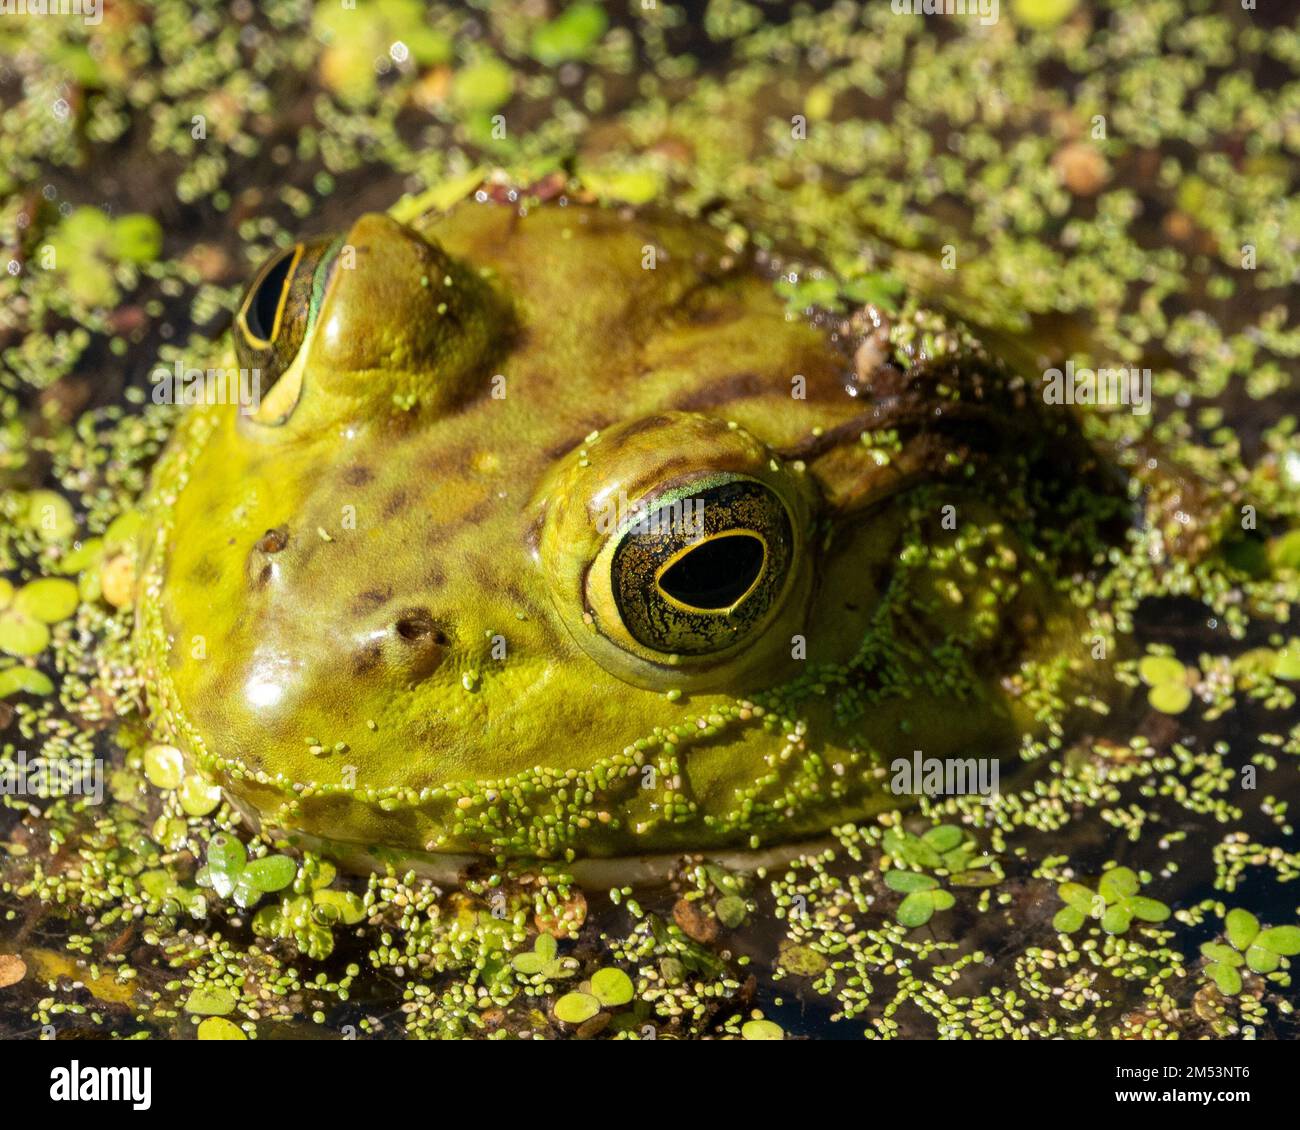 A closeup of a green toad swimming in a swamp Stock Photo